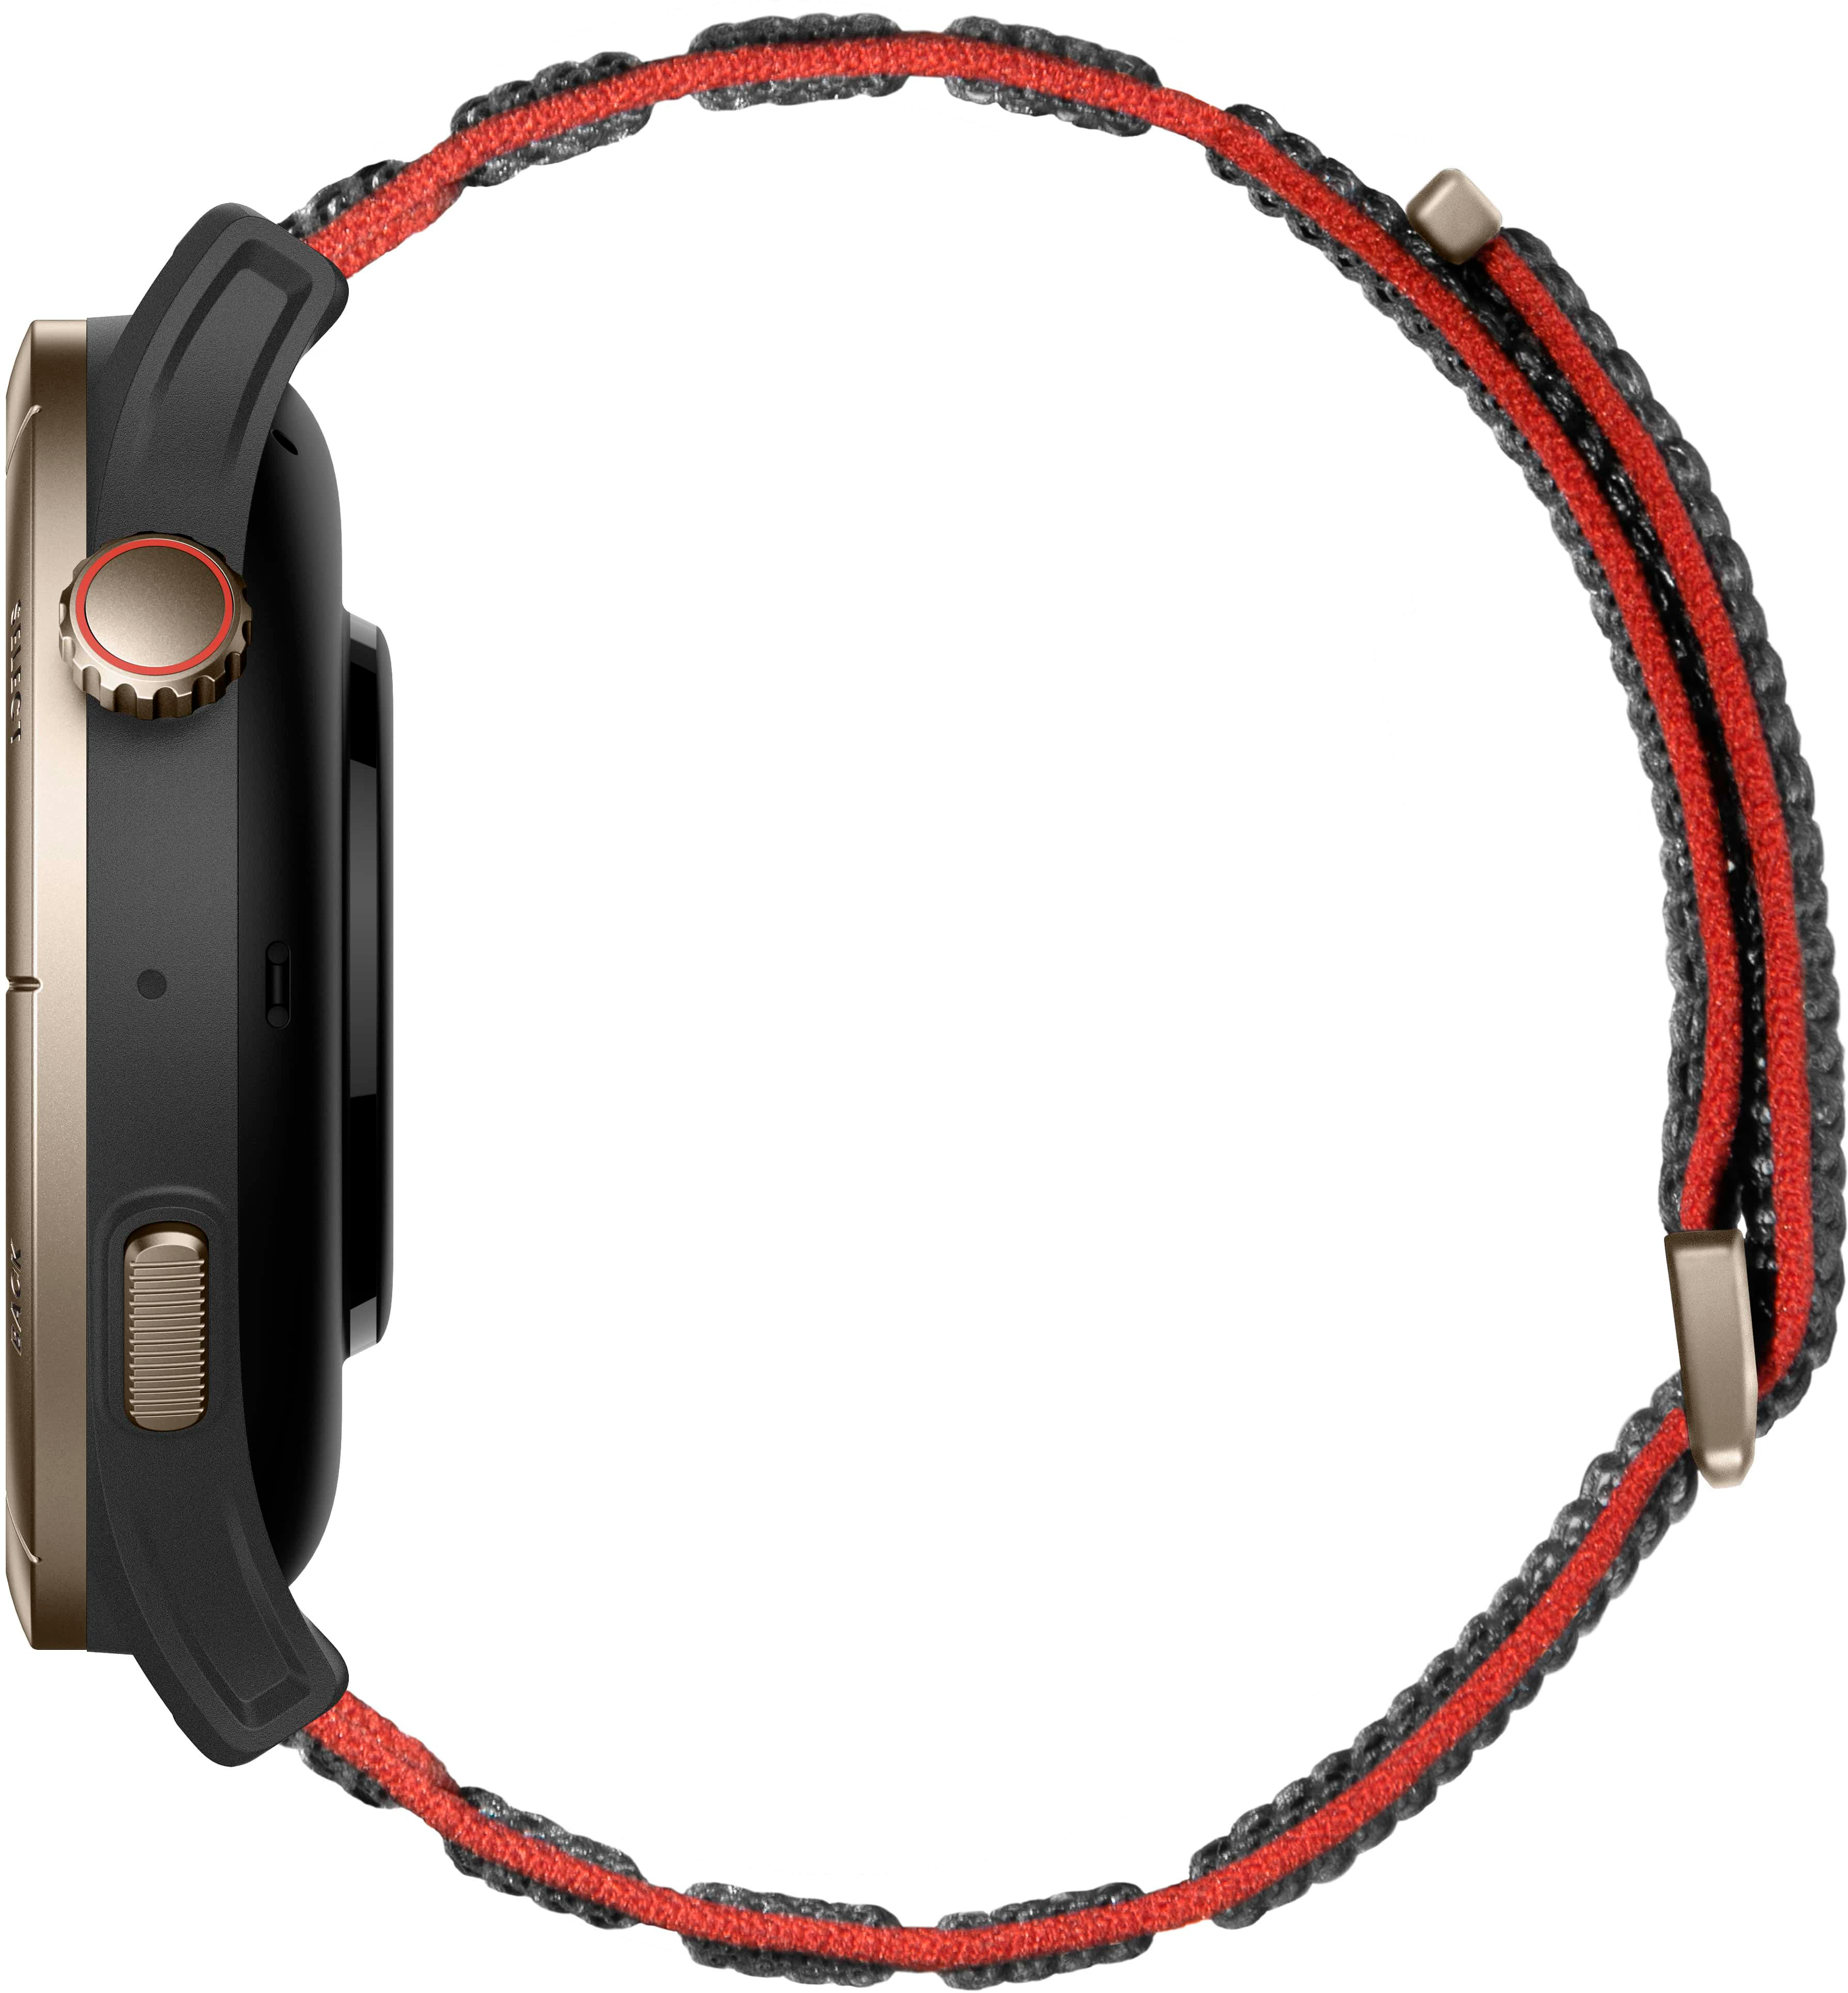 Amazfit Cheetah and Cheetah Pro announced for runners with classic